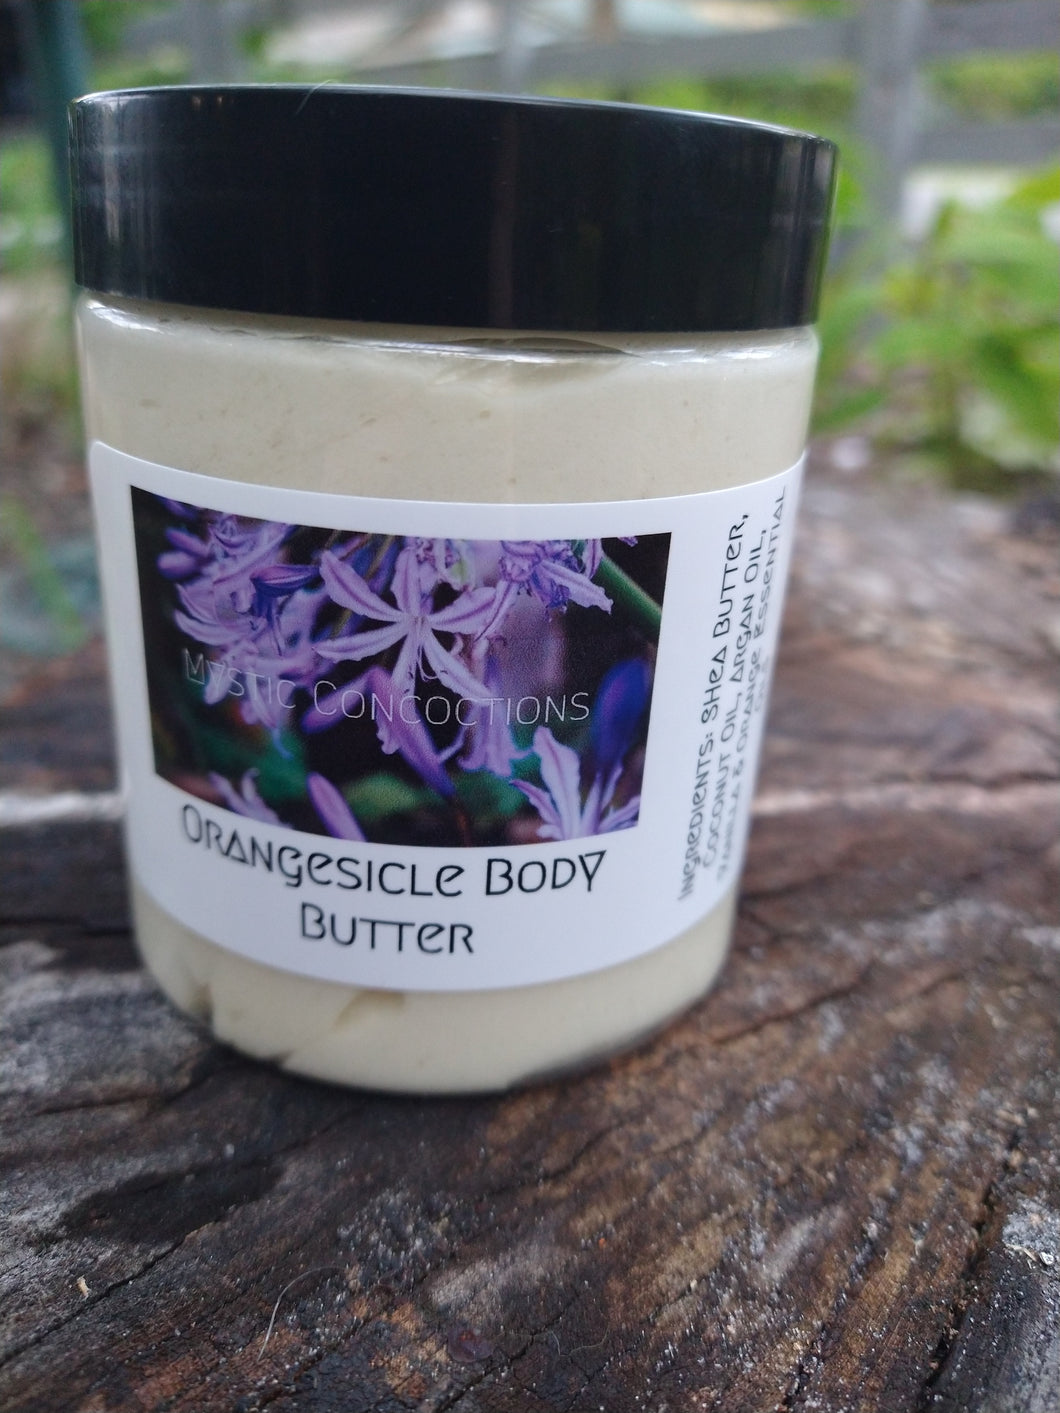 Orangesicle Body Butter